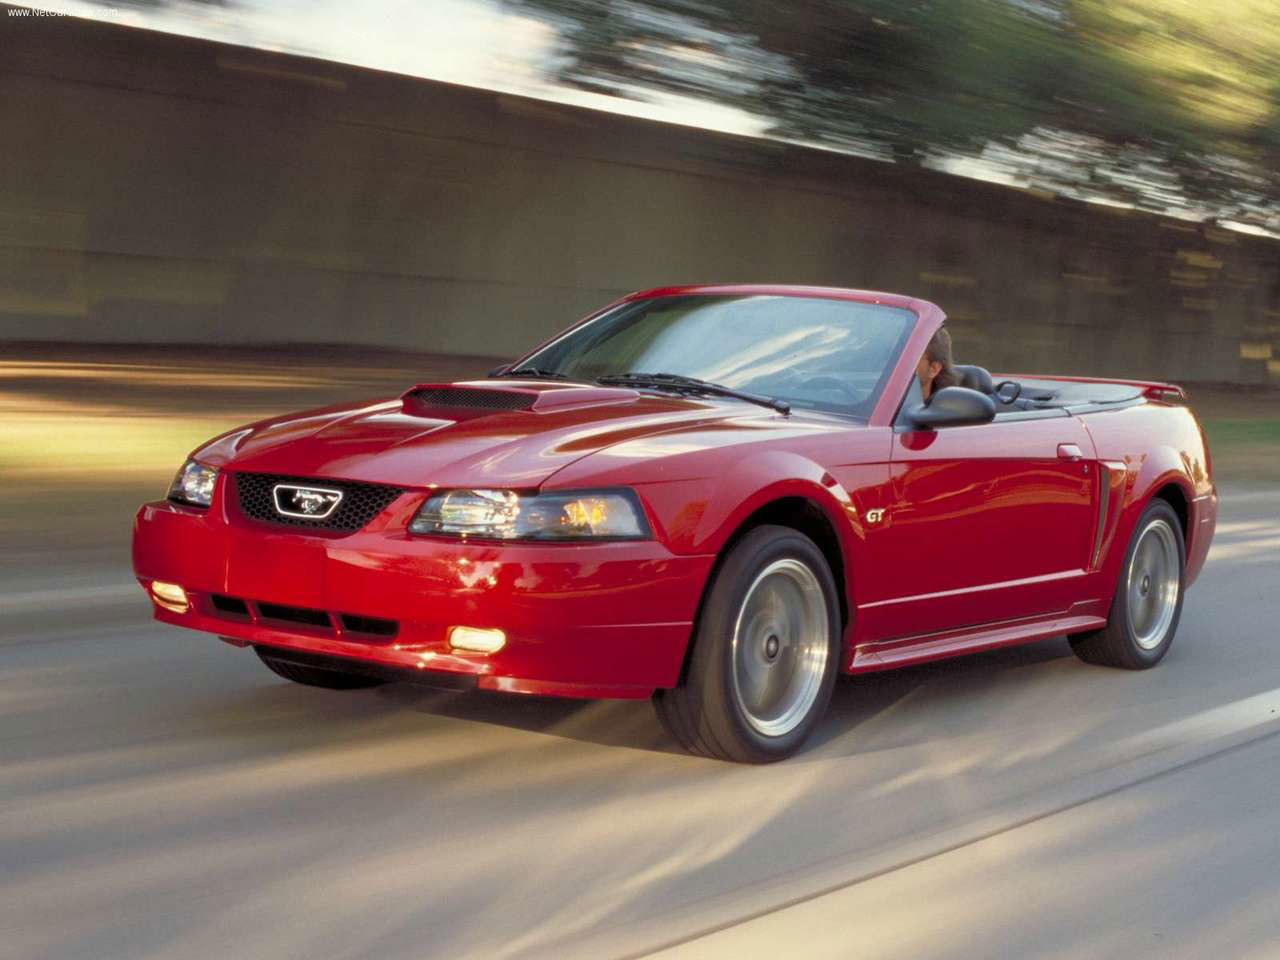 2002 Ford Mustang GT.